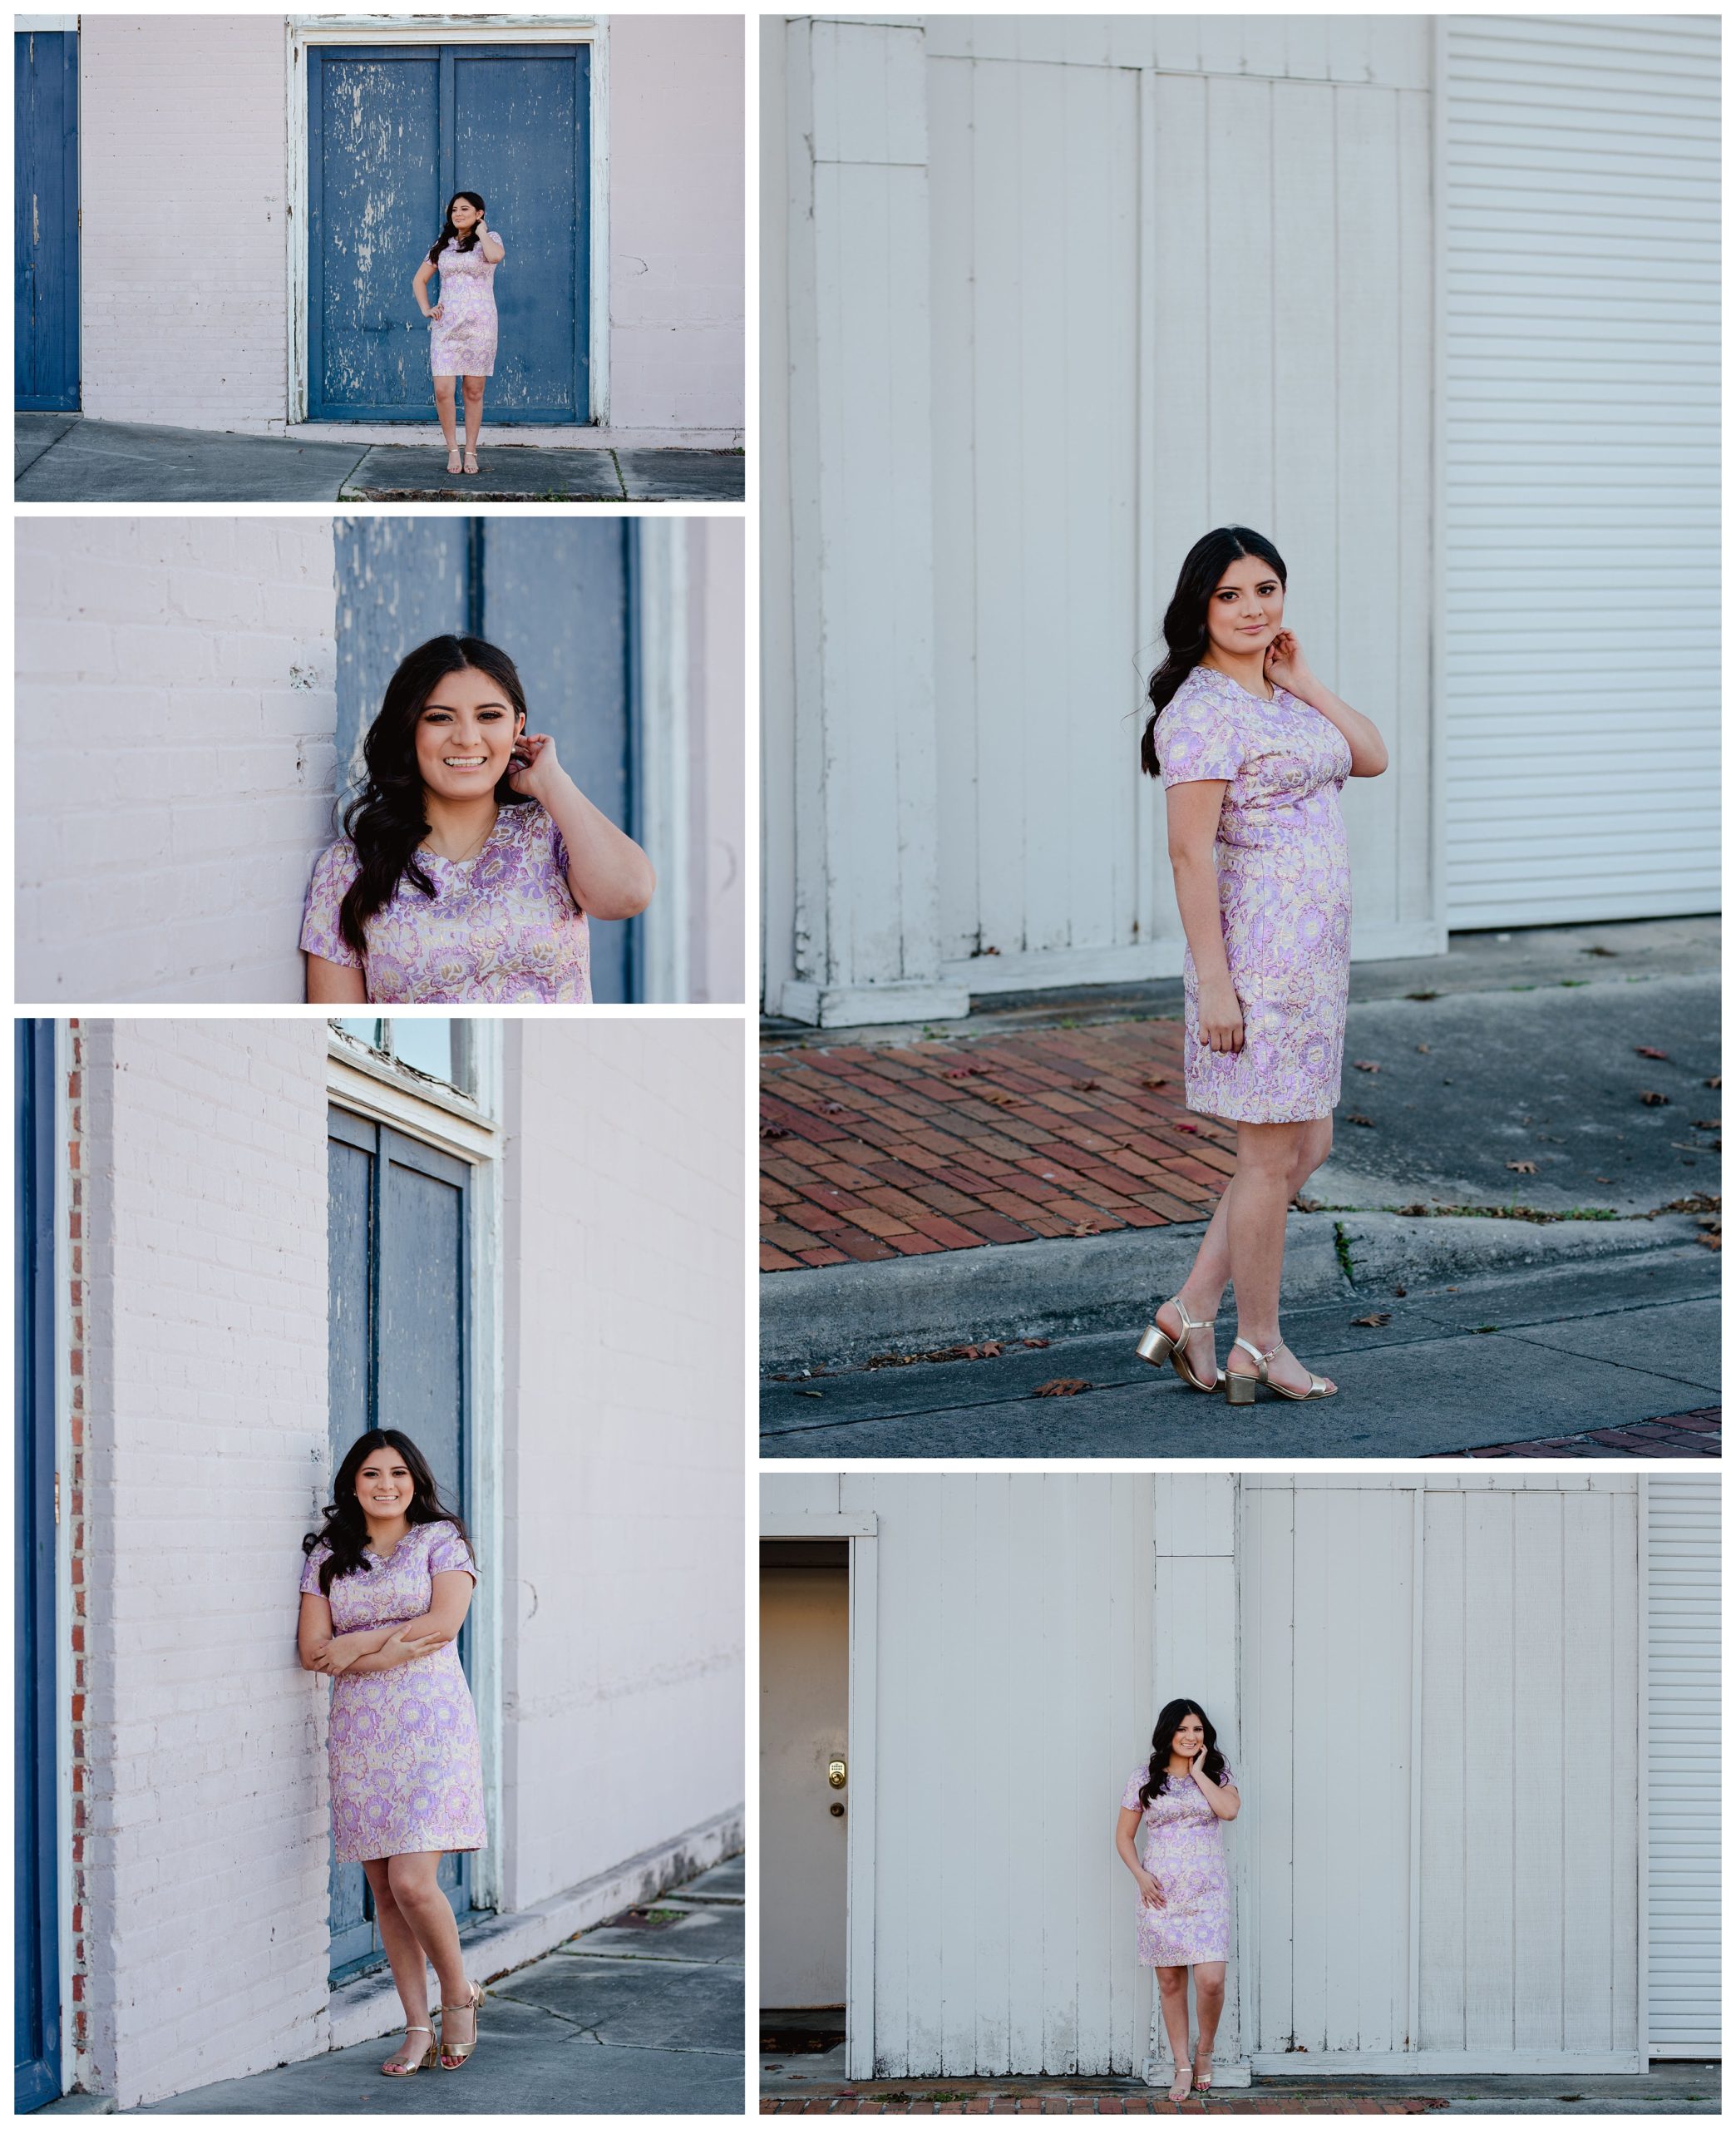 Downtown modern senior photos and matching the outfit to the location.